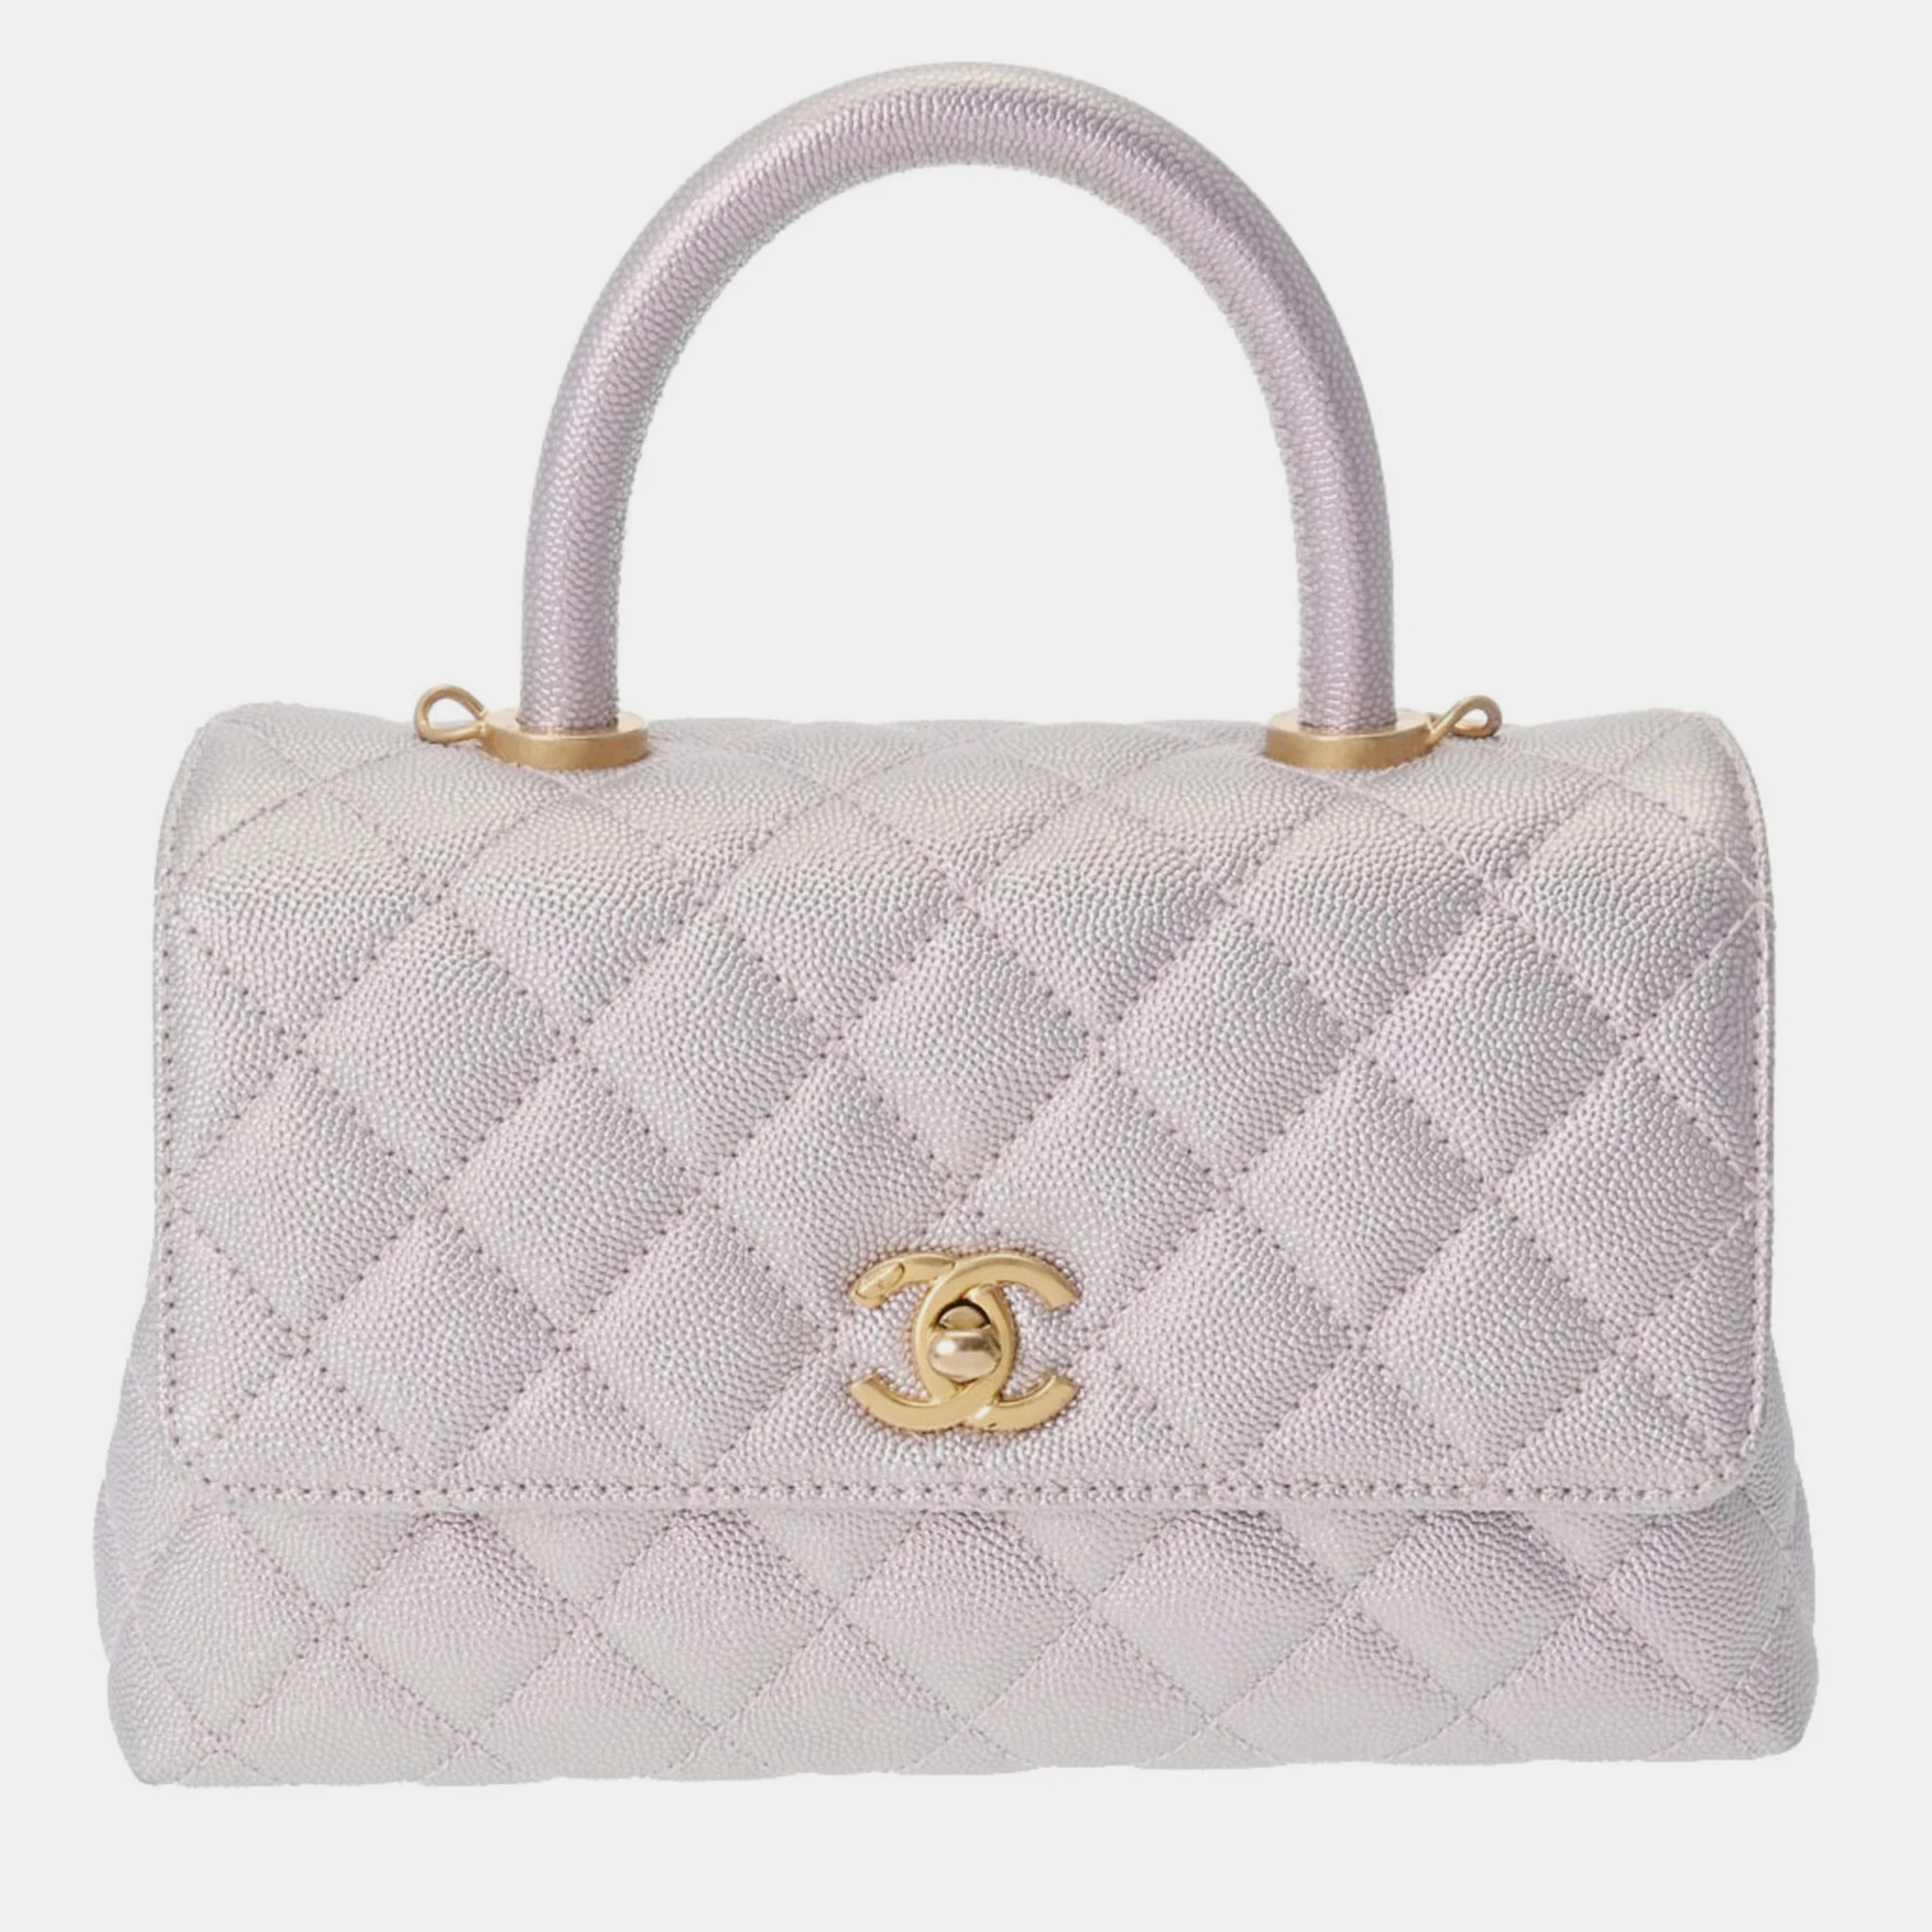 Chanel purple leather small coco handle top handle bags